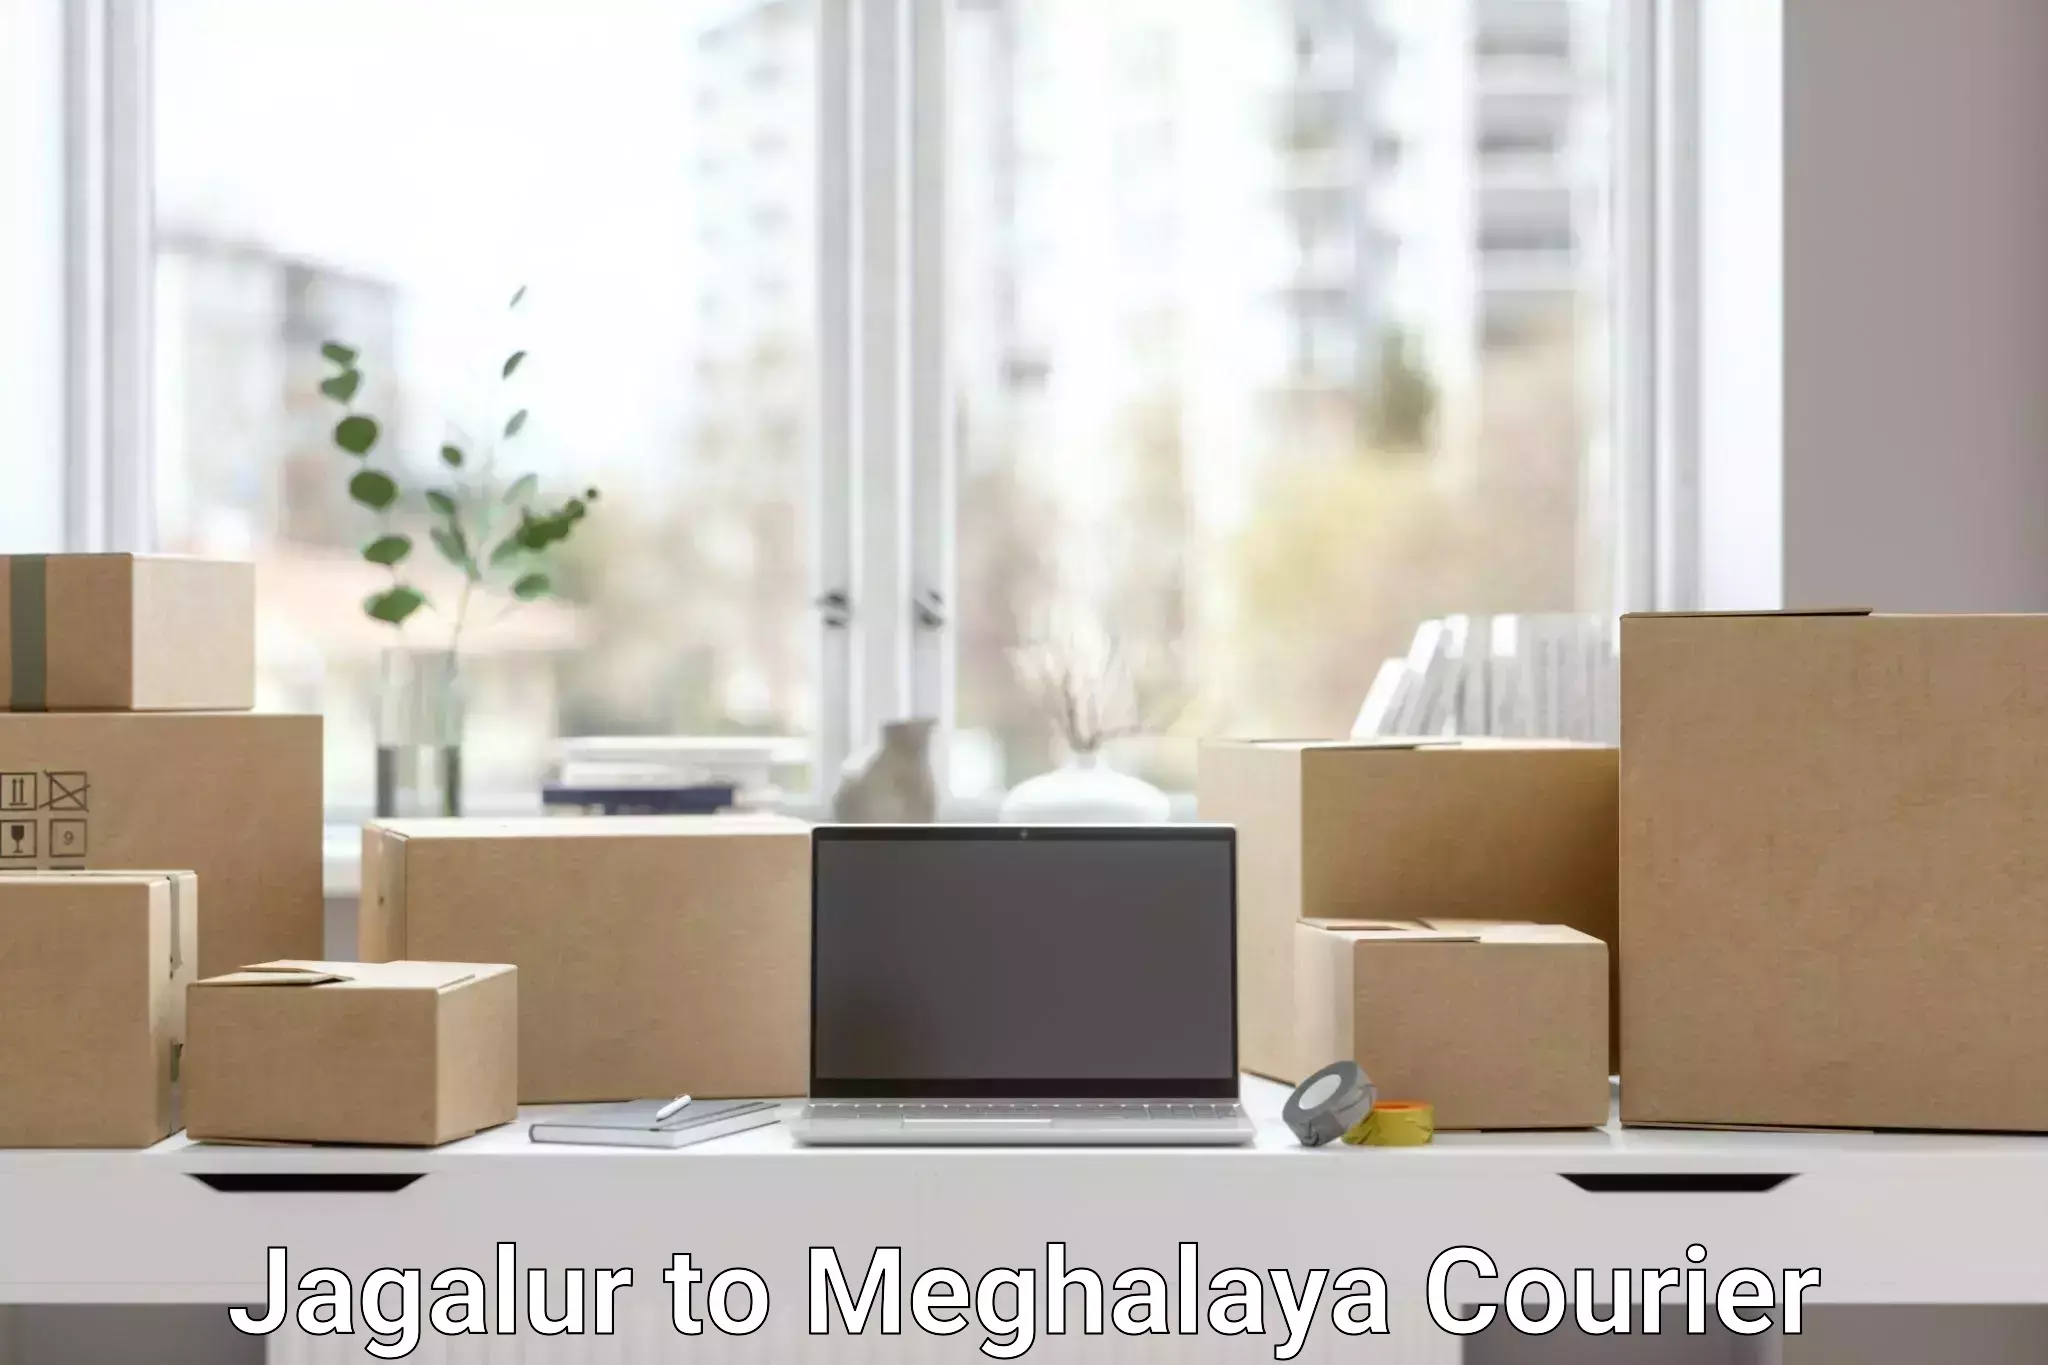 Efficient package consolidation Jagalur to Meghalaya